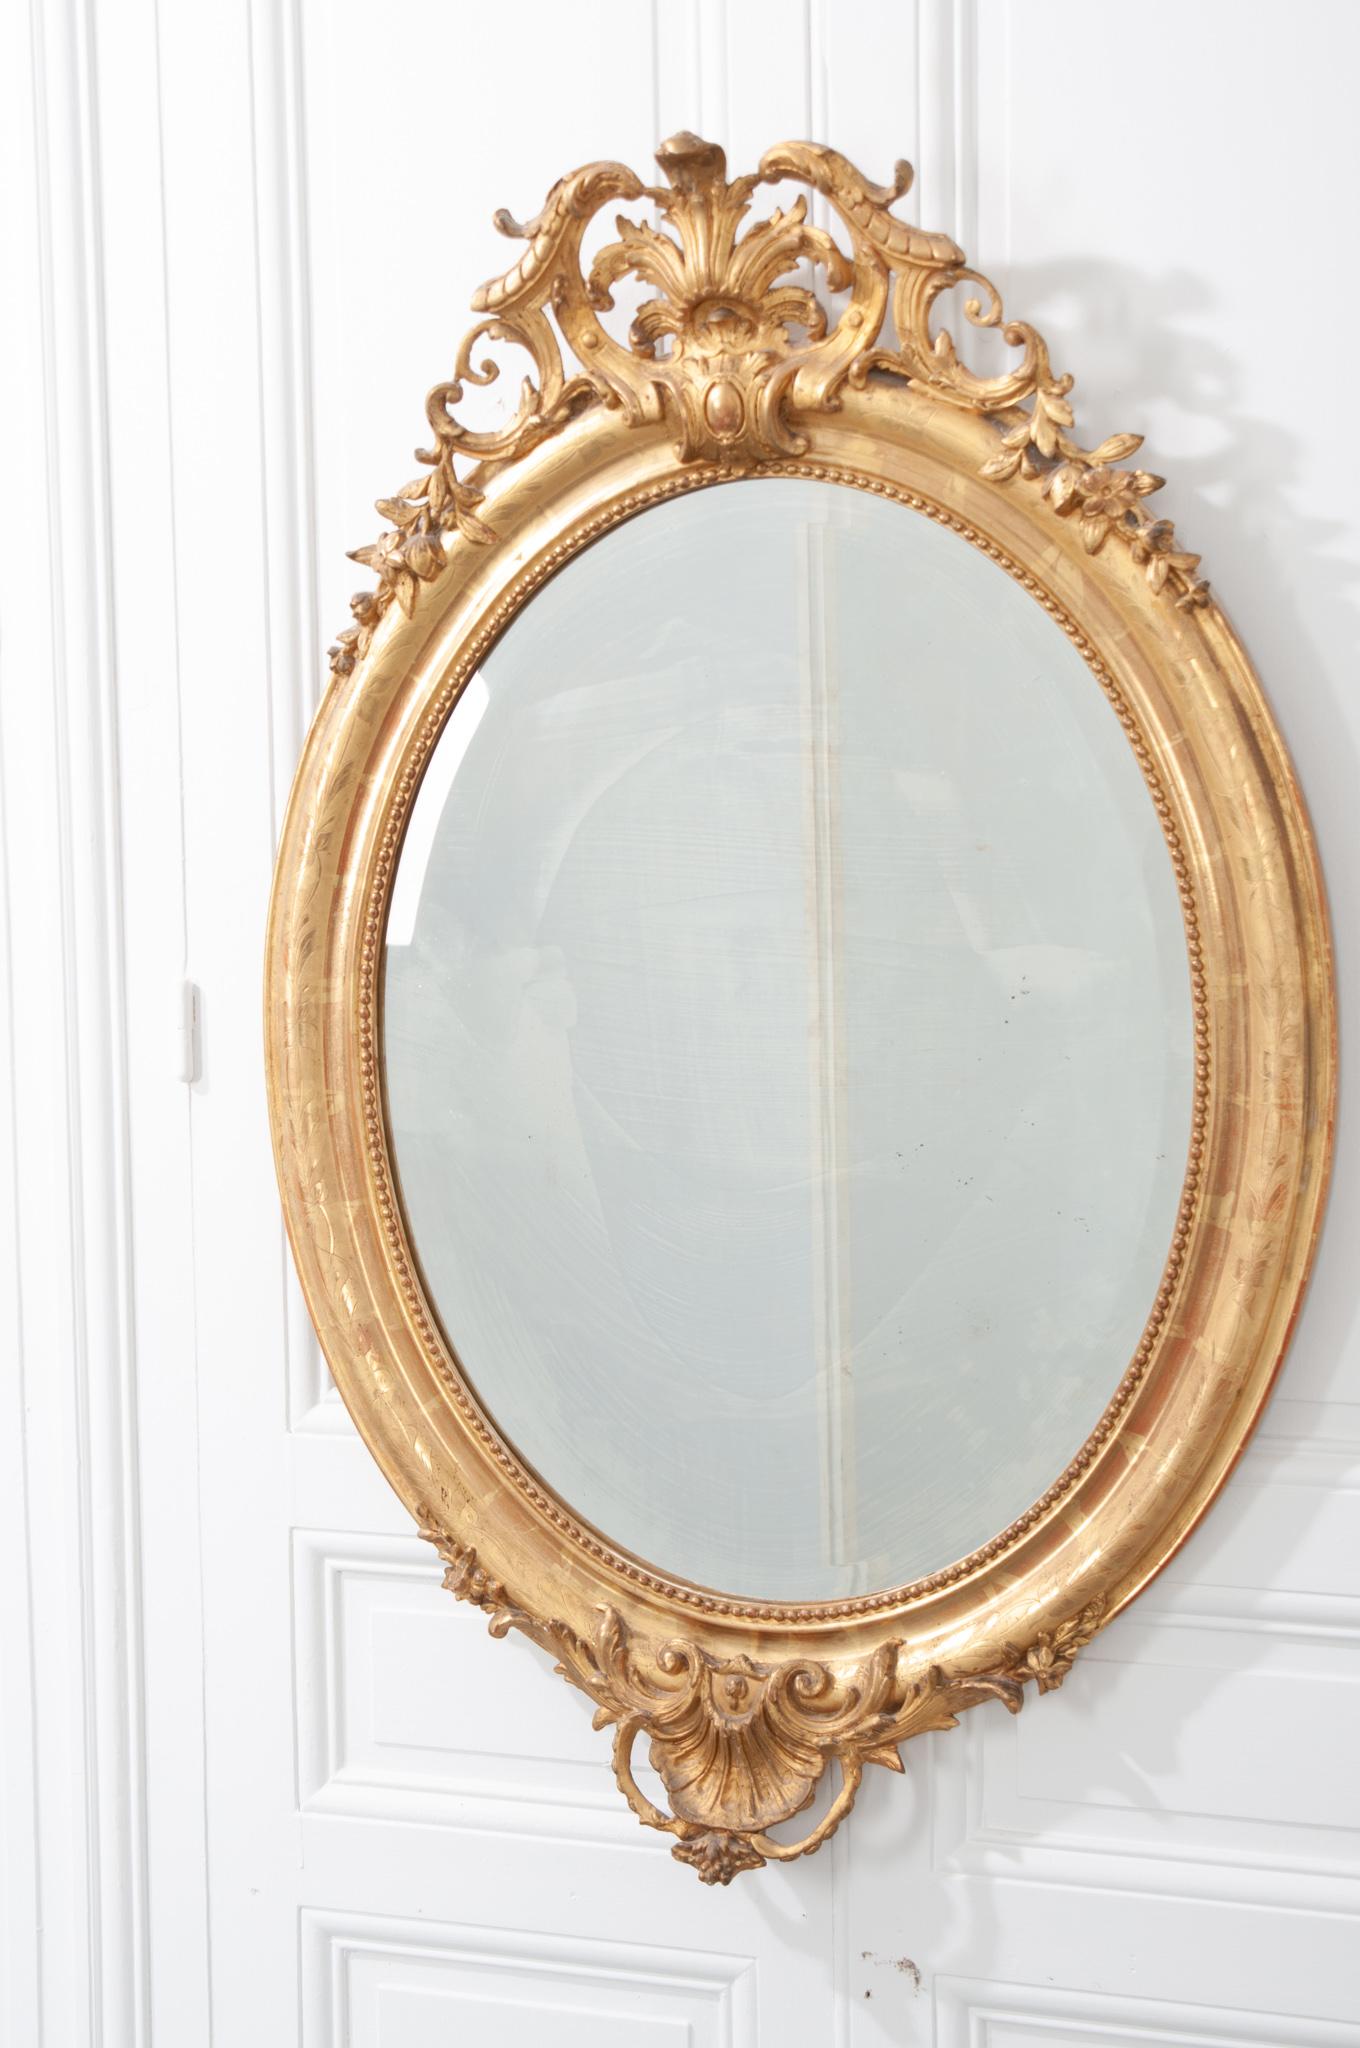 French 19th century oval gold gilt mirror with its original mirror plate. This mirror frame also has water gilting, adding another level of detail. It boasts intricate, carved details across the top and bottom, a beaded design around the inside